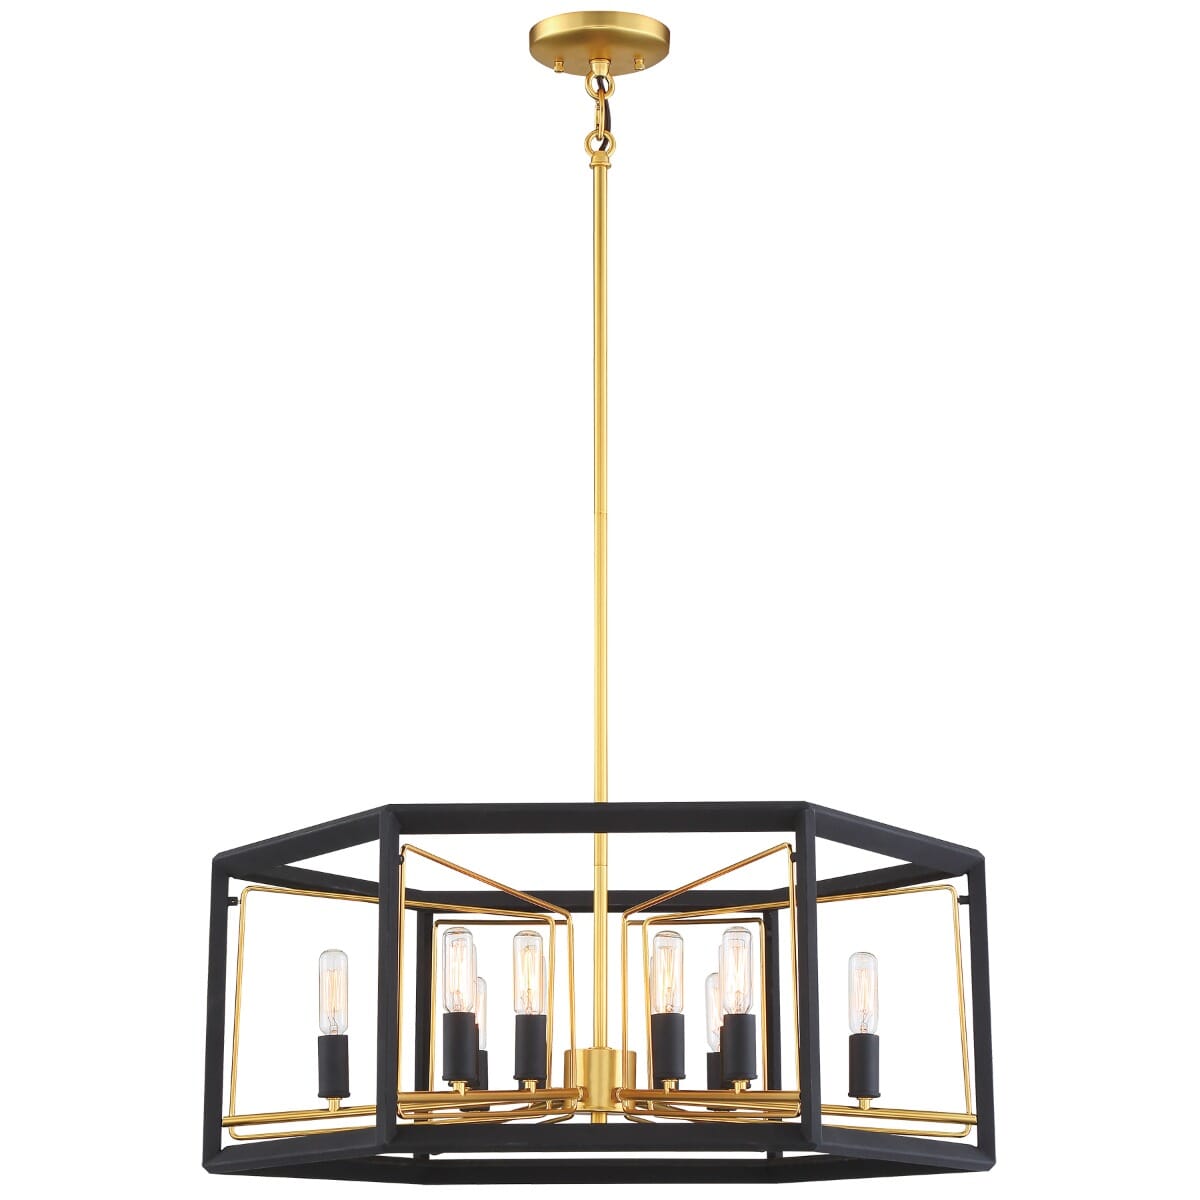 Metropolitan Sable Point 12-Light 26" Pendant Light in Sand Black with Honey Gold Accents